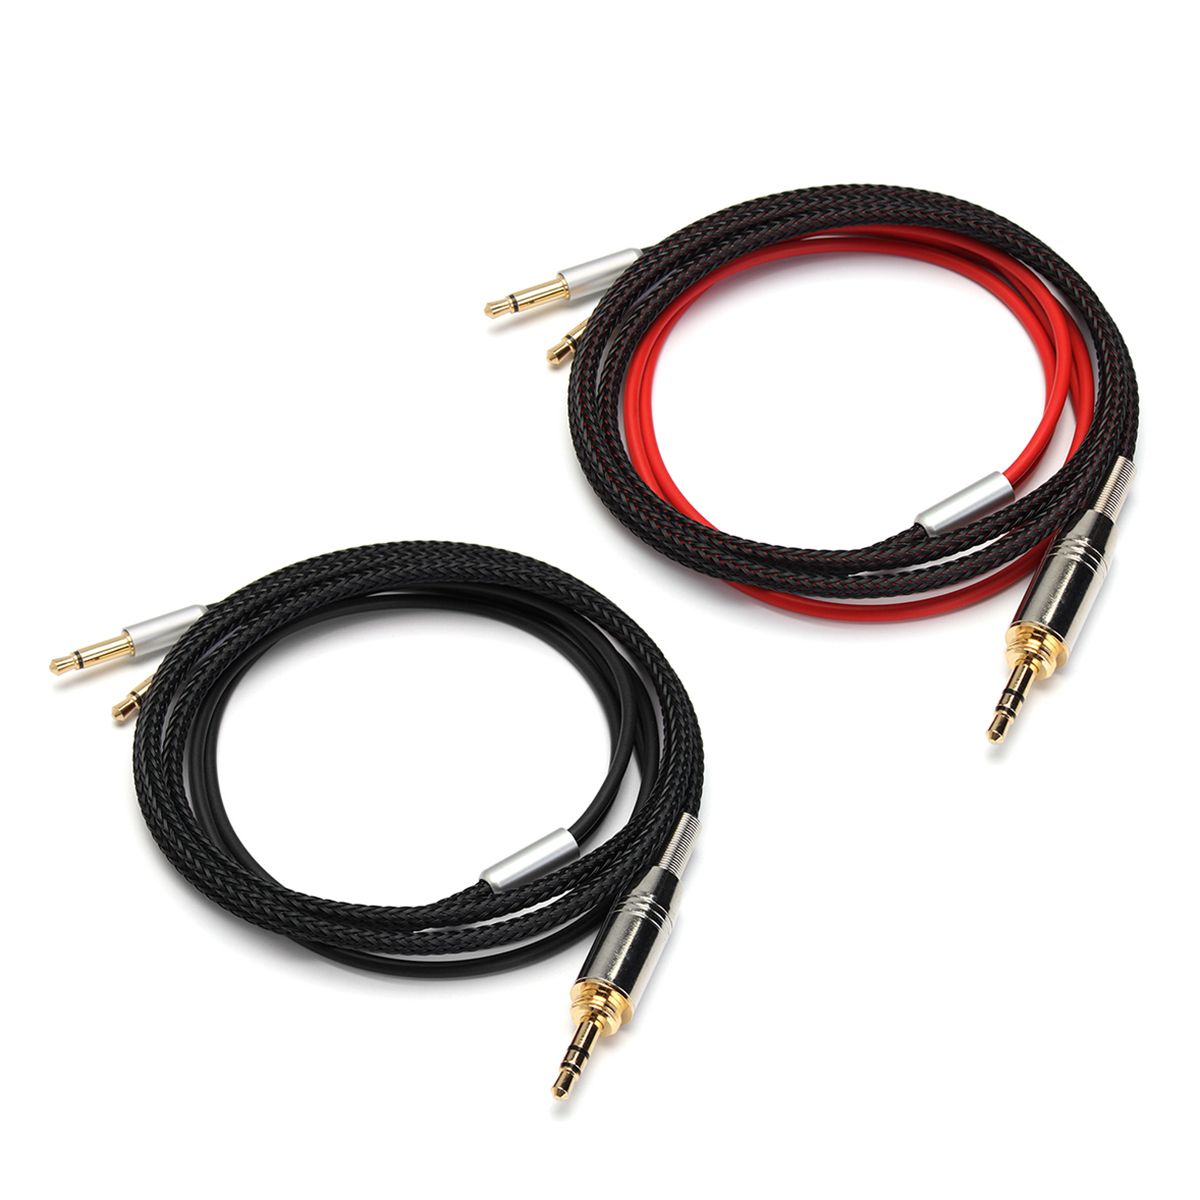 Replacement-Audio-Upgrade-Cable-For-Meze-99-Classics-Focal-Elear-Headphone-1320420